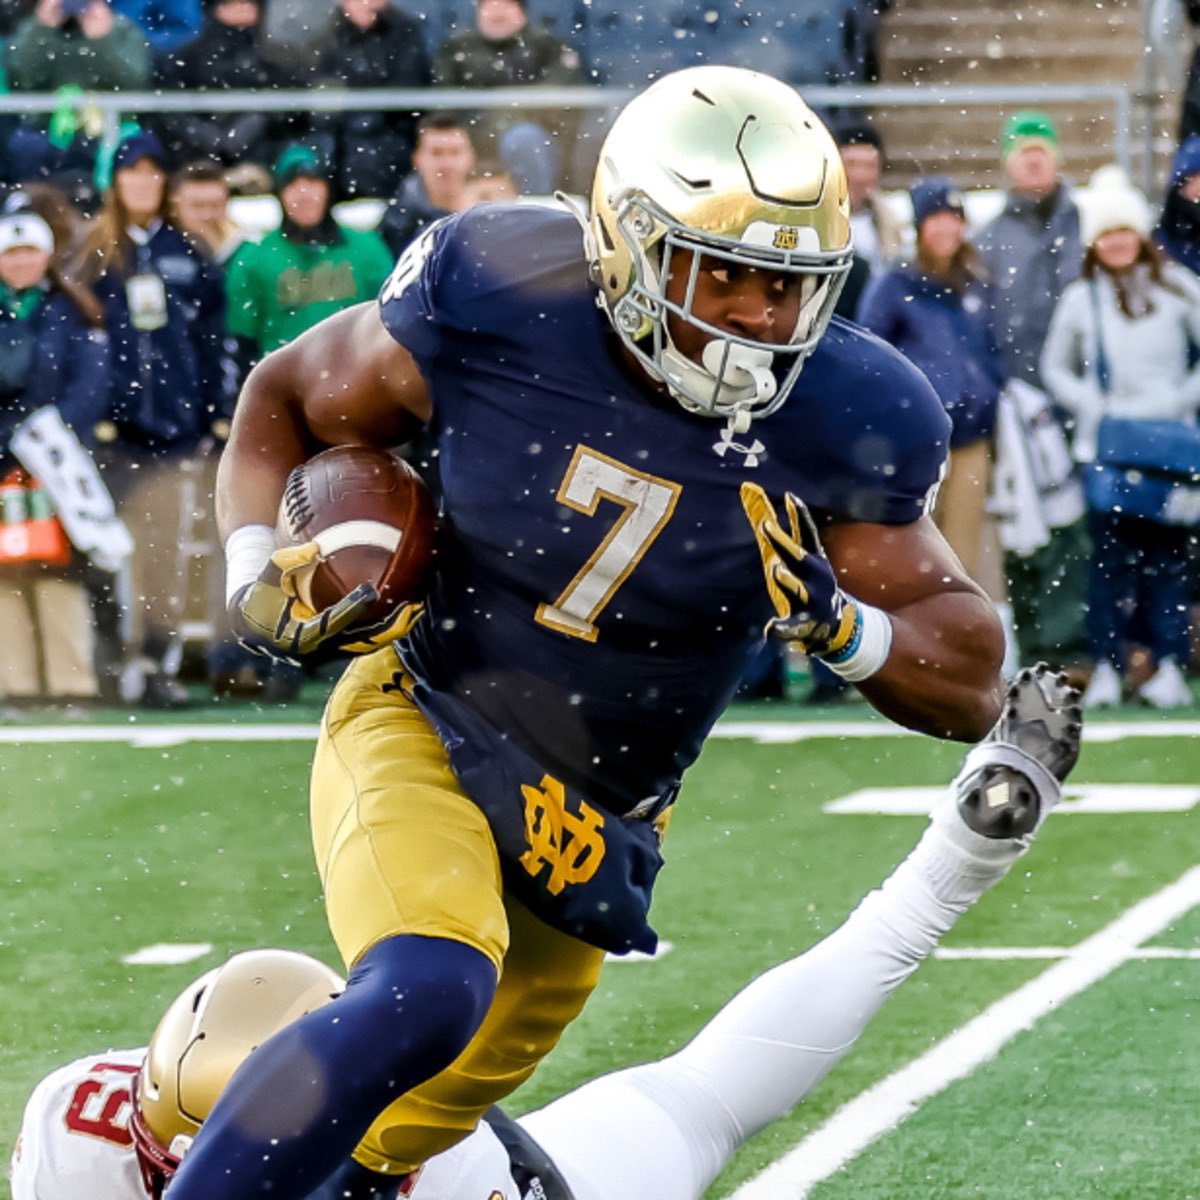 #AGTG Blessed to receive an offer from the University of Notre Dame @coachdrebrown @ocrobbyjones @RecruitAledo @AledoHFC #GoIrish